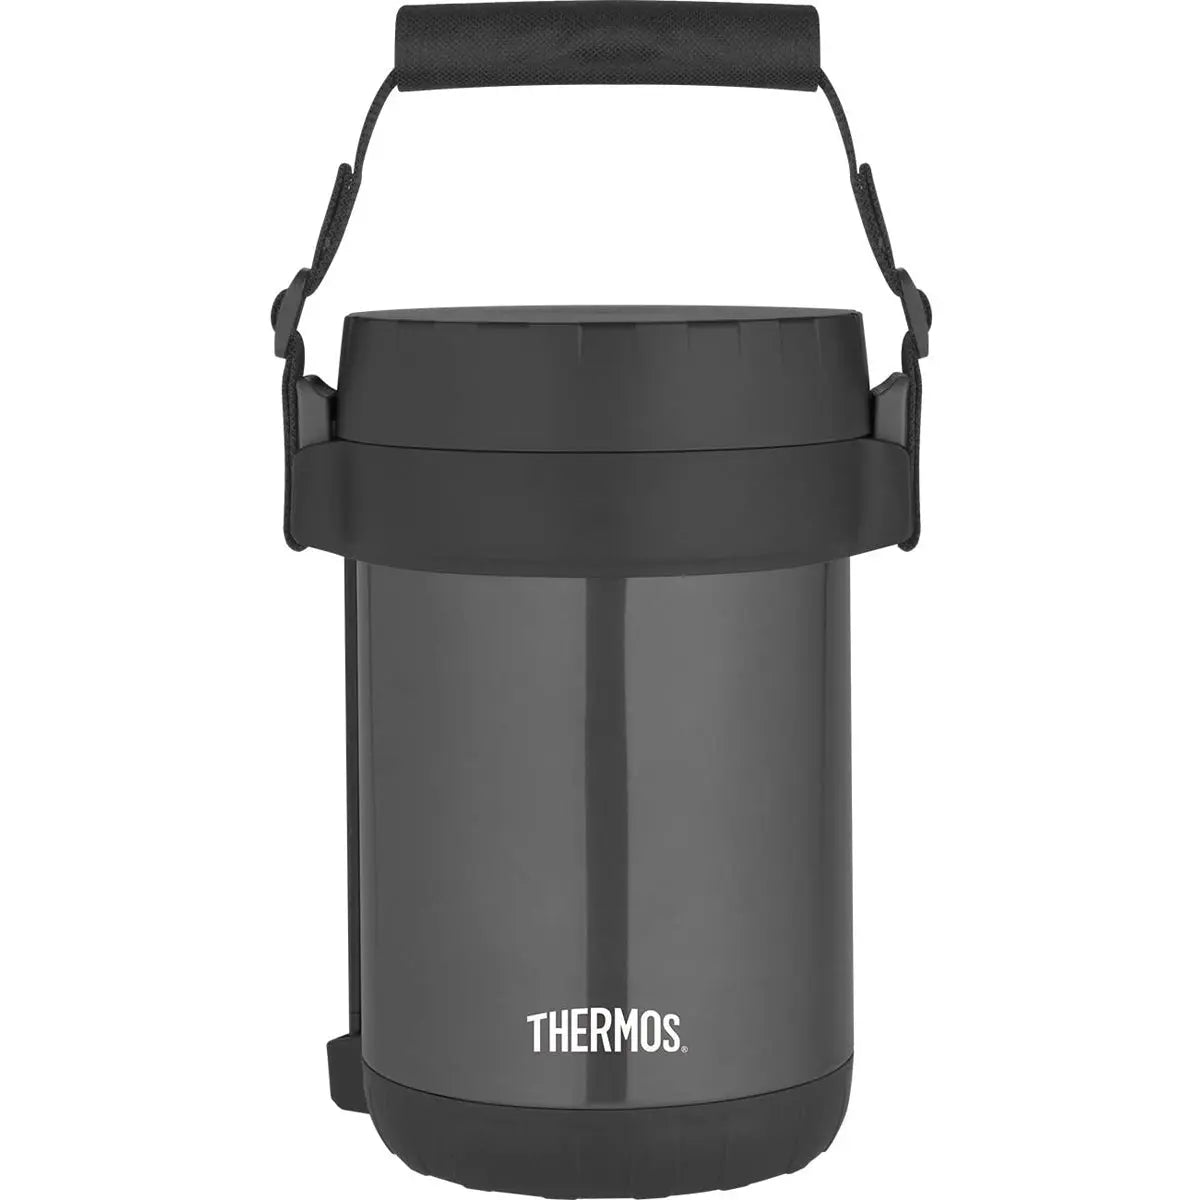 Thermos Vacuum Insulated All-In-One Meal Carrier with Spoon - Stainless Steel Thermos